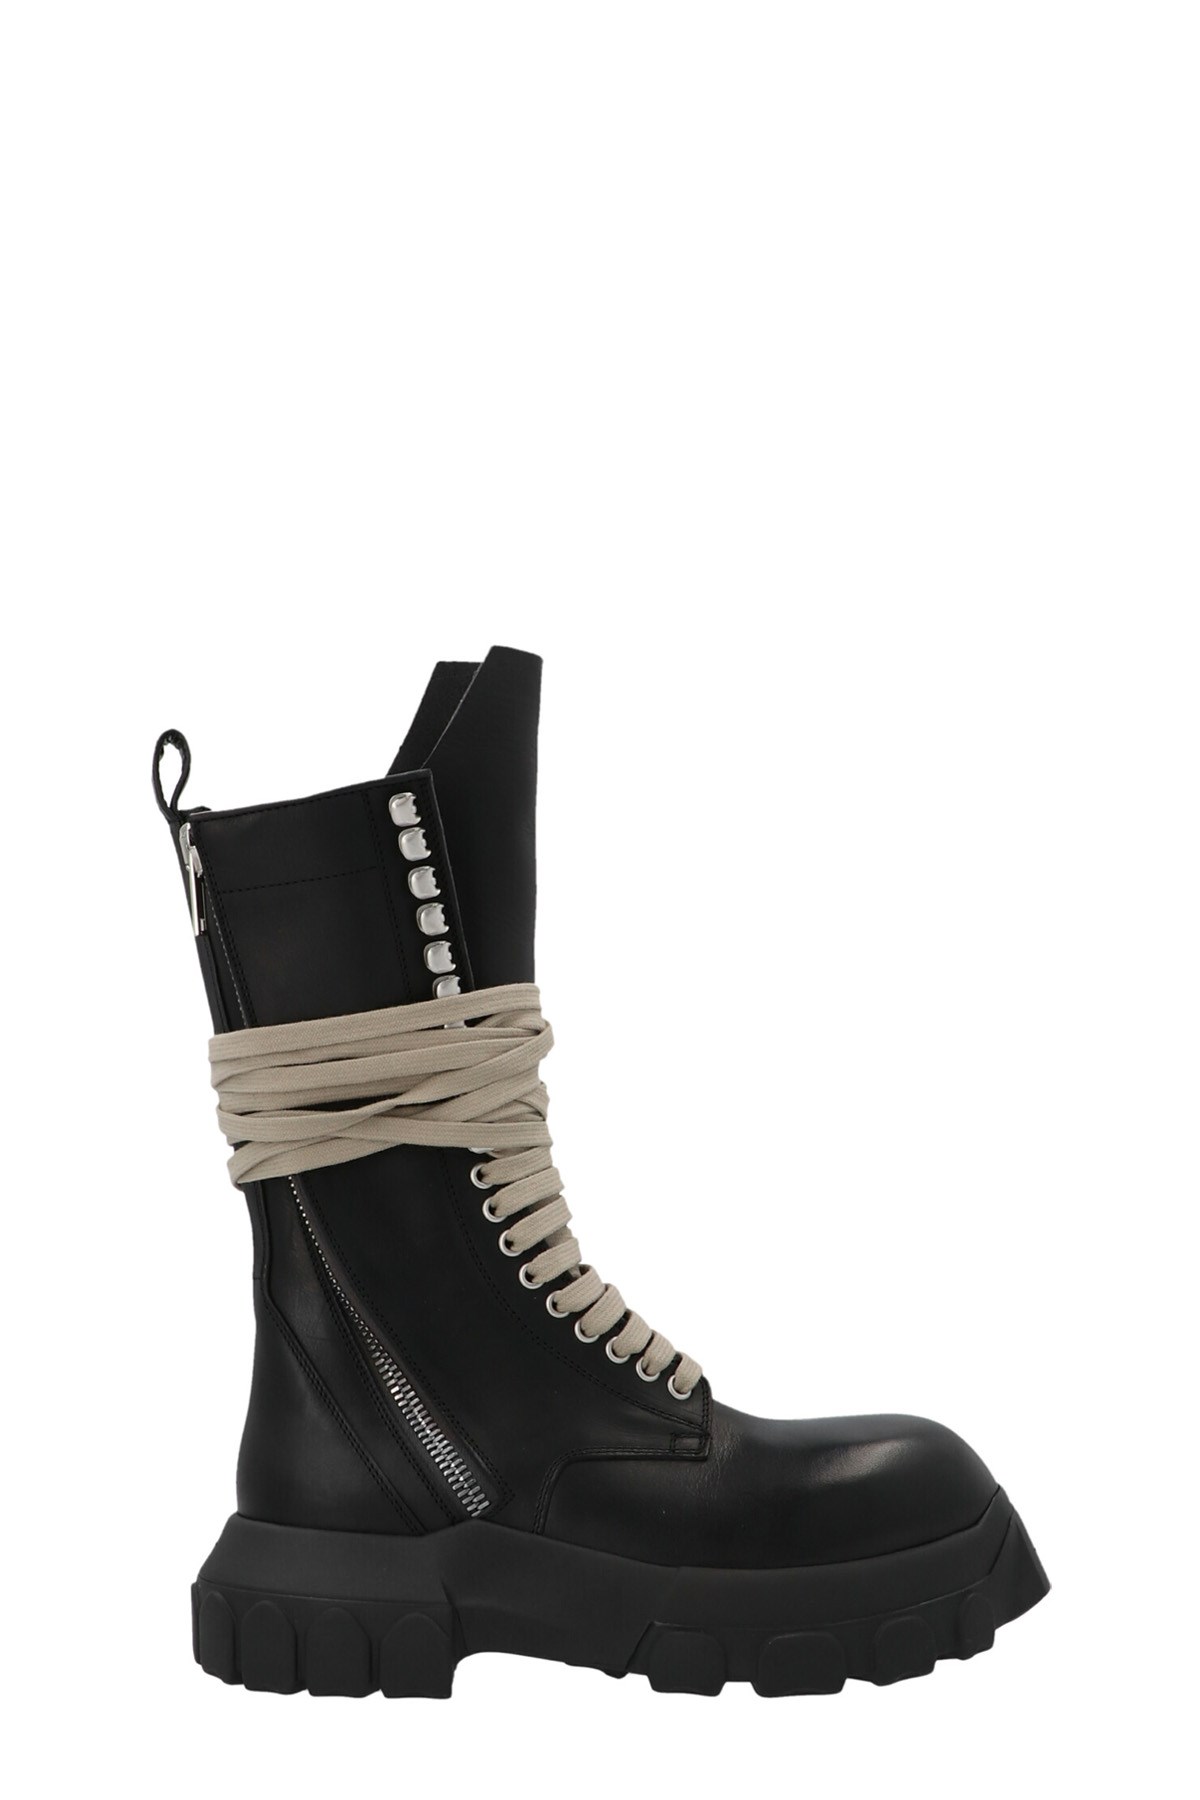 RICK OWENS 'Laceup Tractor’ Ankle Boots